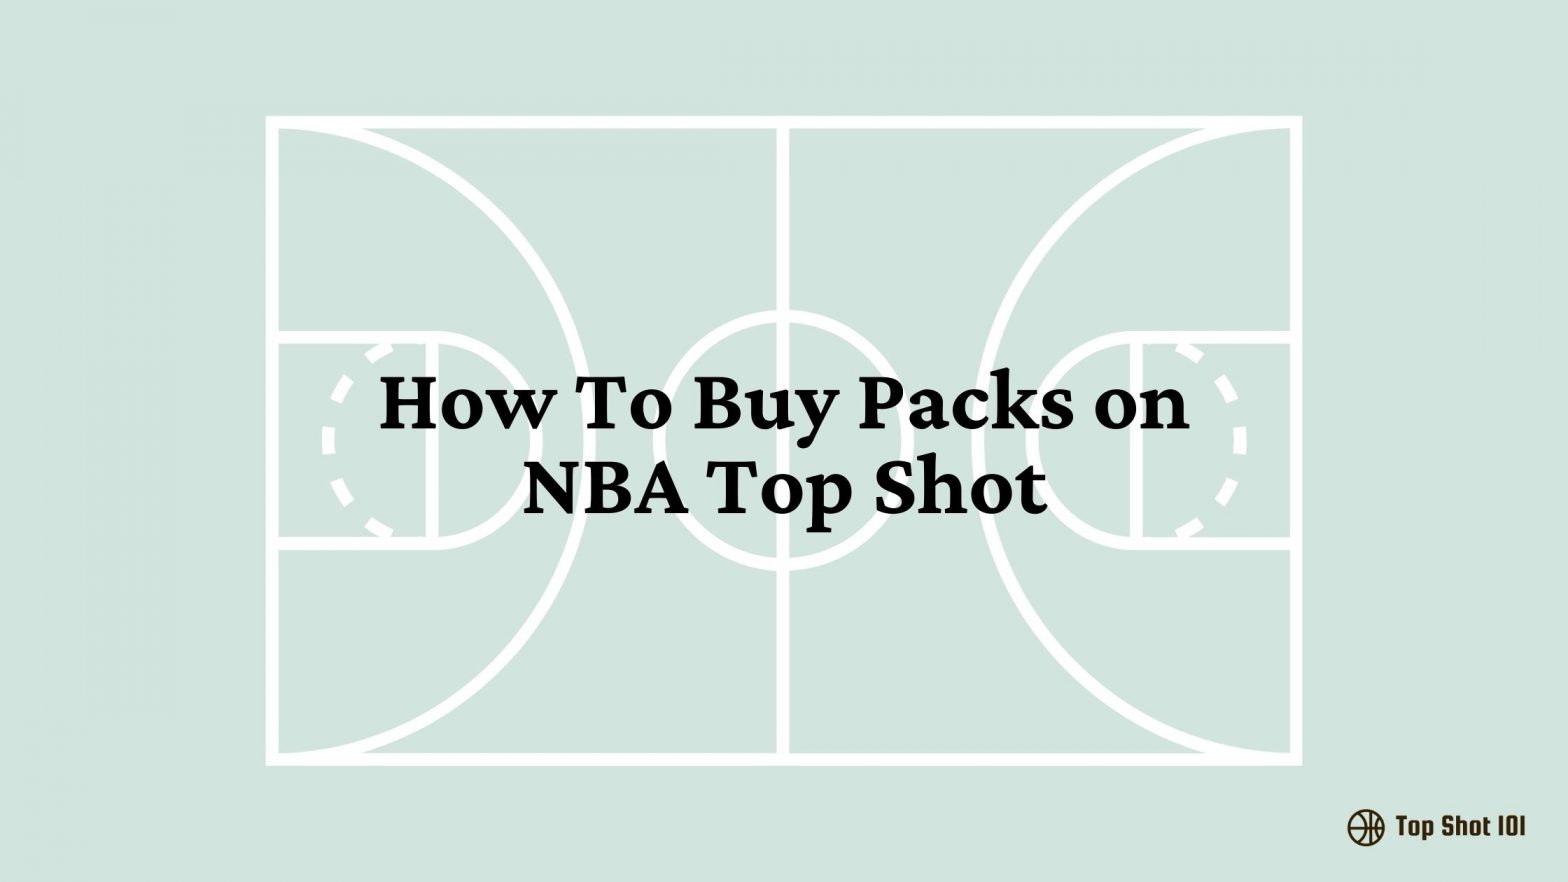 How To Buy Packs on NBA Top Shot